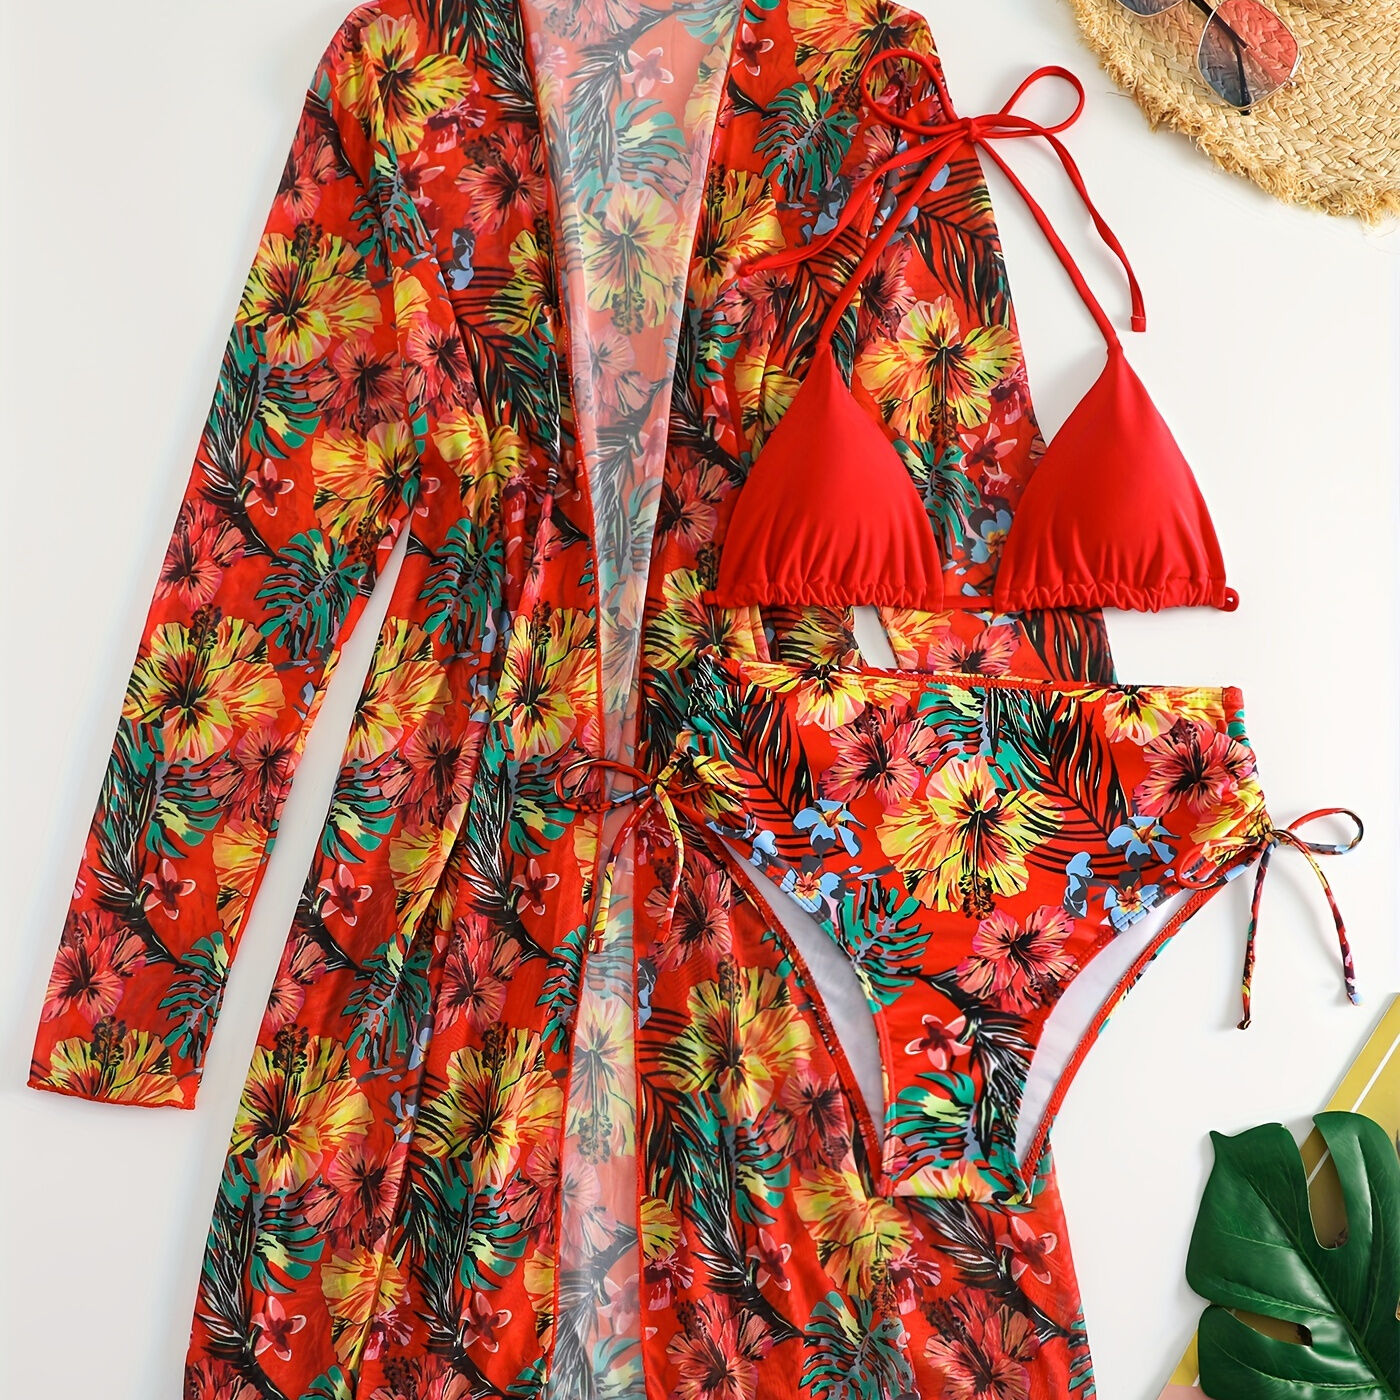 Temu 3-pieces Tropical Print Bikini Sets, Halter Neck Tie Back Tie Side High Cut With Cover Up Shirt Swimsuit, Women's Swimwear & Clothing Triangle Top Rose Red M